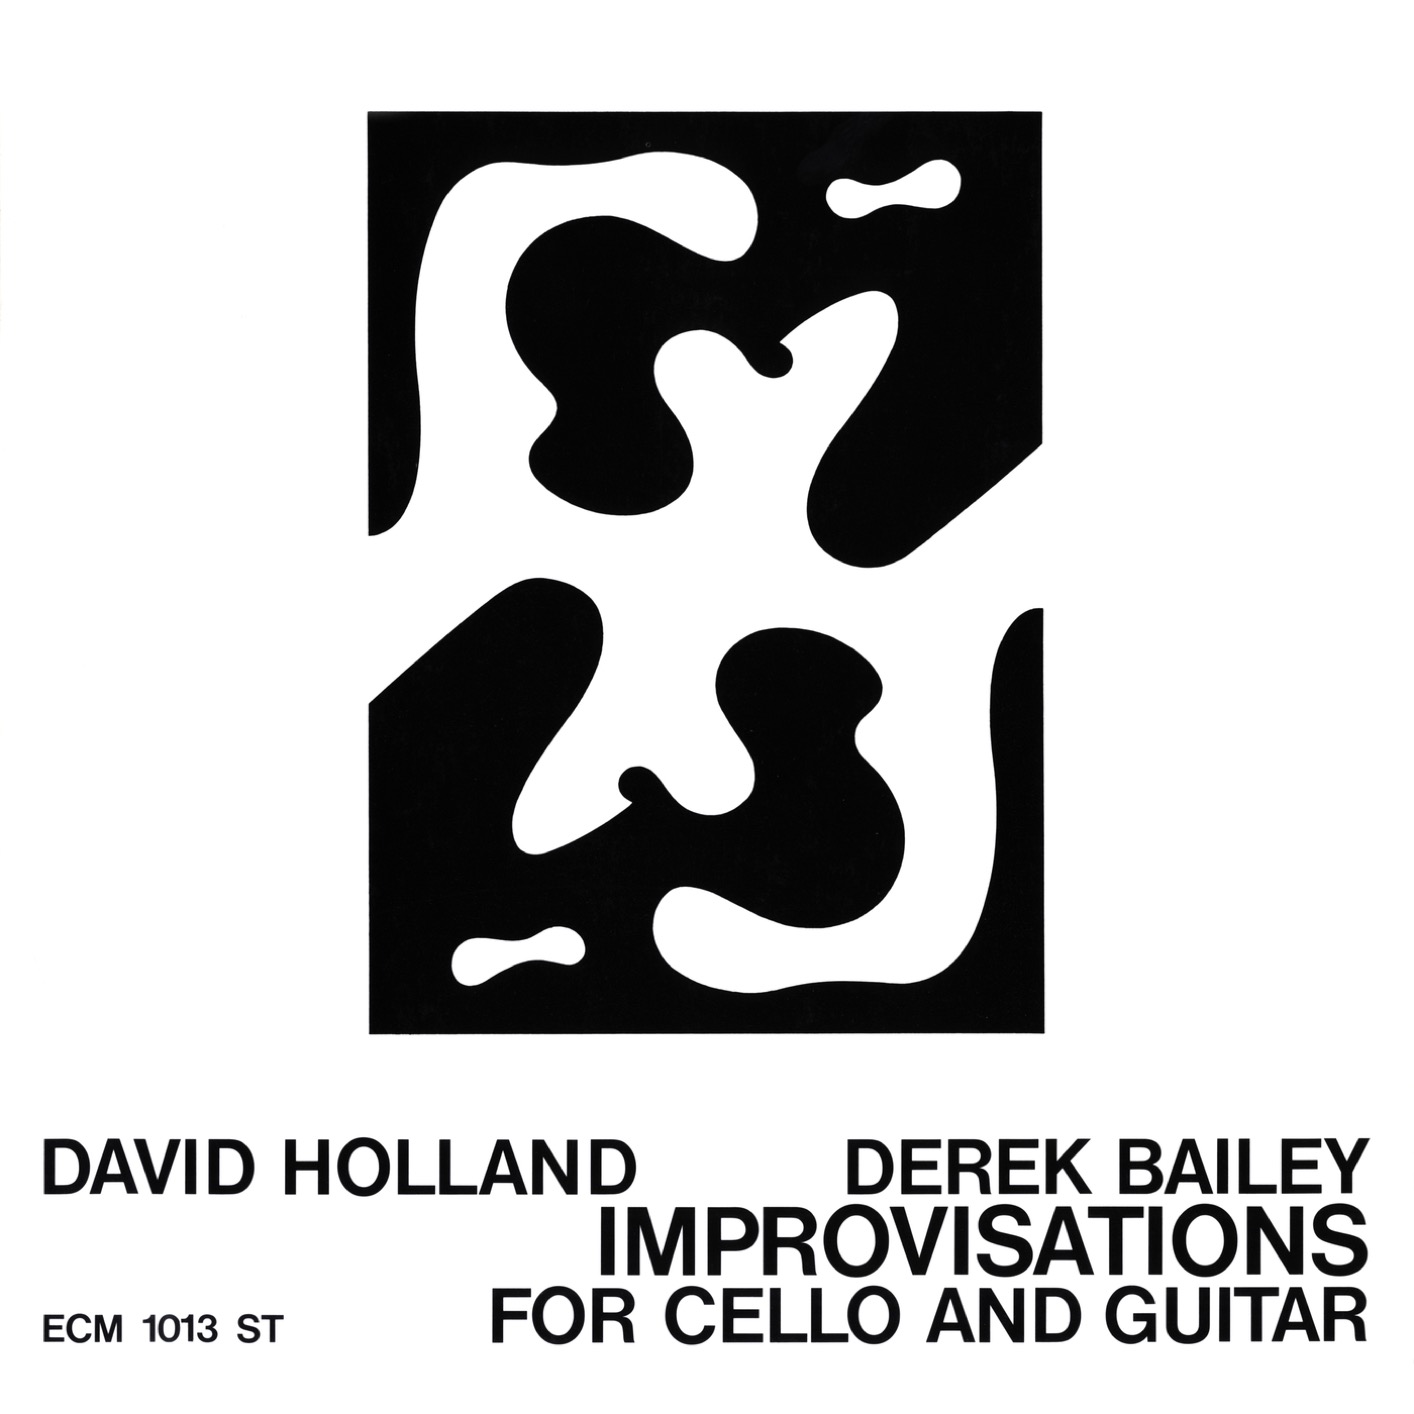 Dave Holland, Derek Bailey – Improvisations For Cello And Guitar – Live At Little Theater Club, London 1971 (1971/2019) [FLAC 24bit/96kHz]